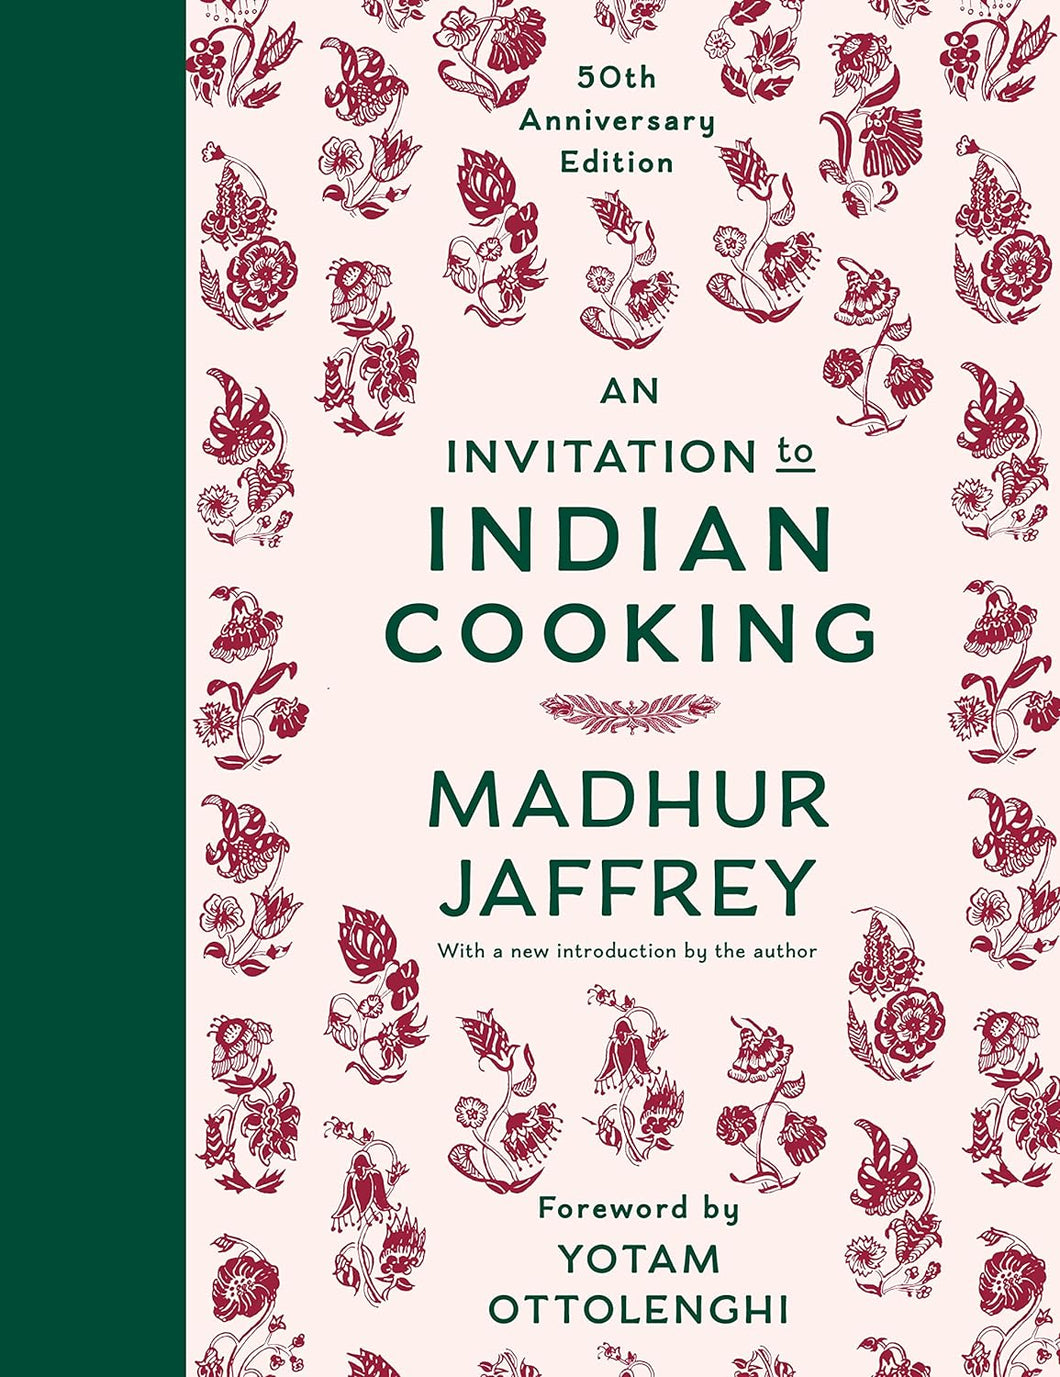 An Invitation to Indian Cooking by Madhur Jaffrey (50th anniversary edition)